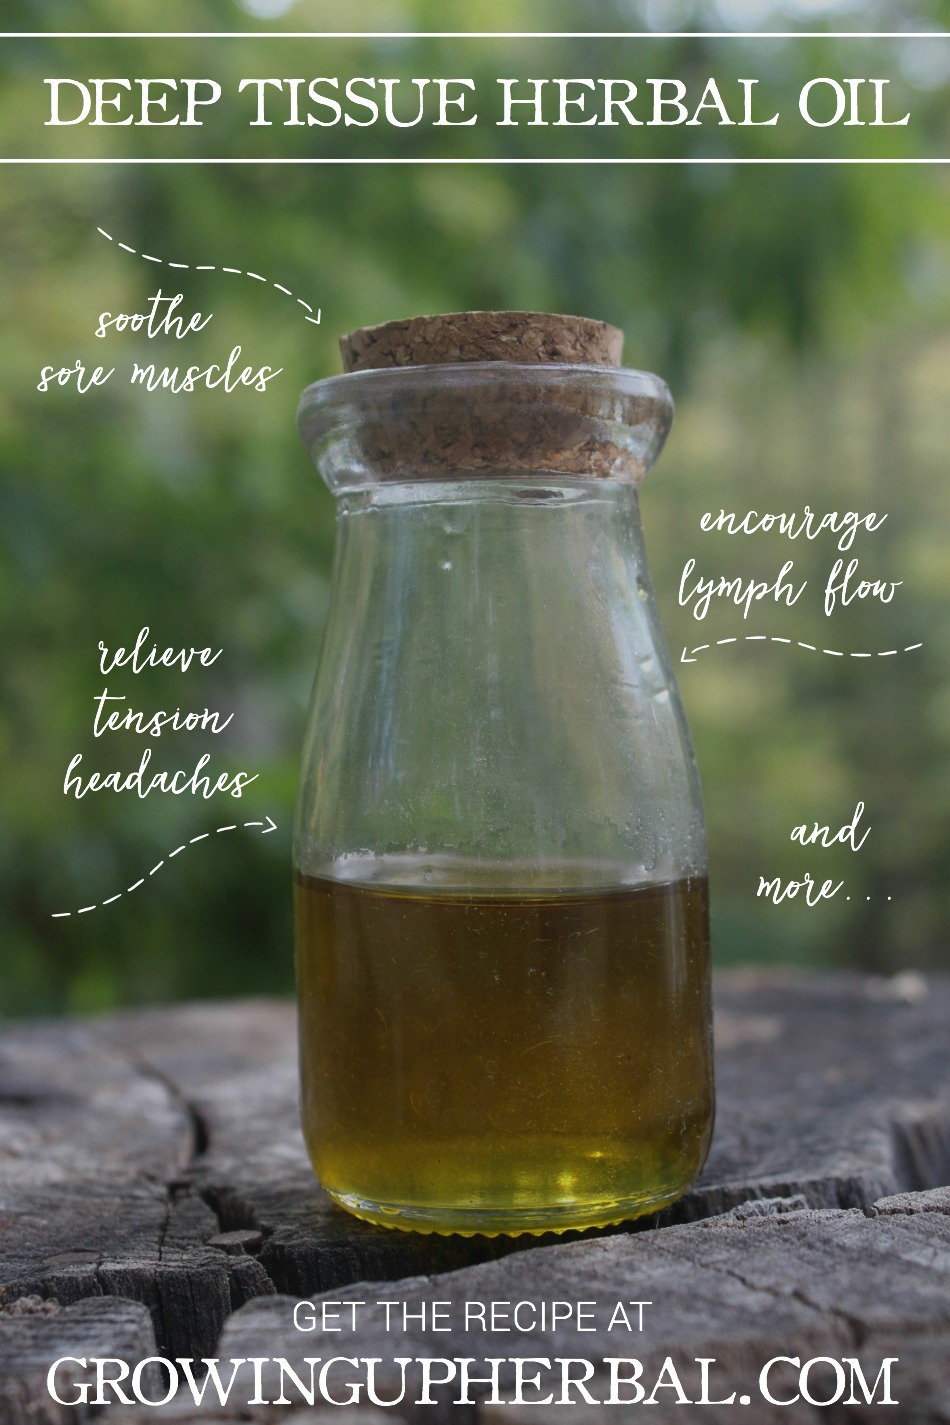 DIY Deep Tissue Herbal Oil For Hardworking Men | Growing Up Herbal | Here’s an herbal recipe to help soothe sore, achy muscles (and more). Perfect for the hardworking man in your life!